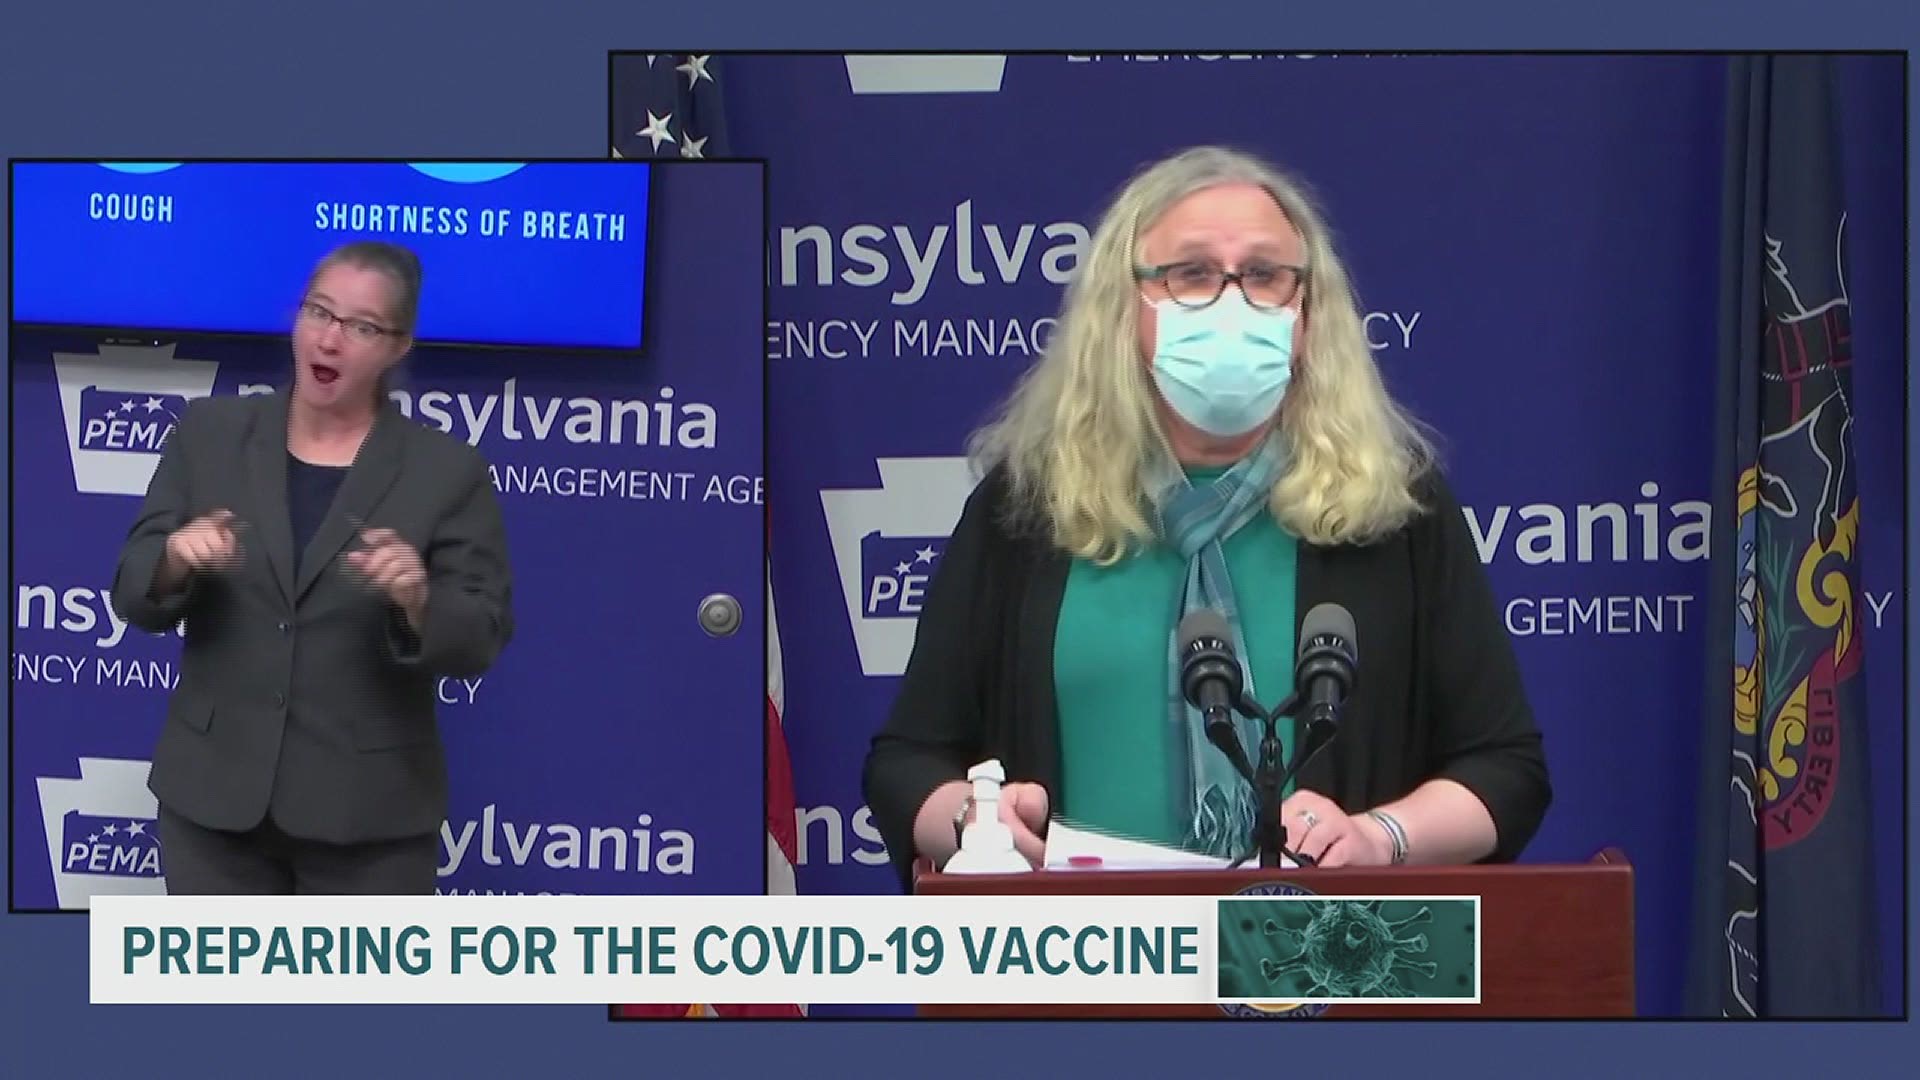 PA Dept. Of Health Secretary Dr. Rachel Levine will discuss the COVID-19 vaccine and plans in the state, once the vaccine is available